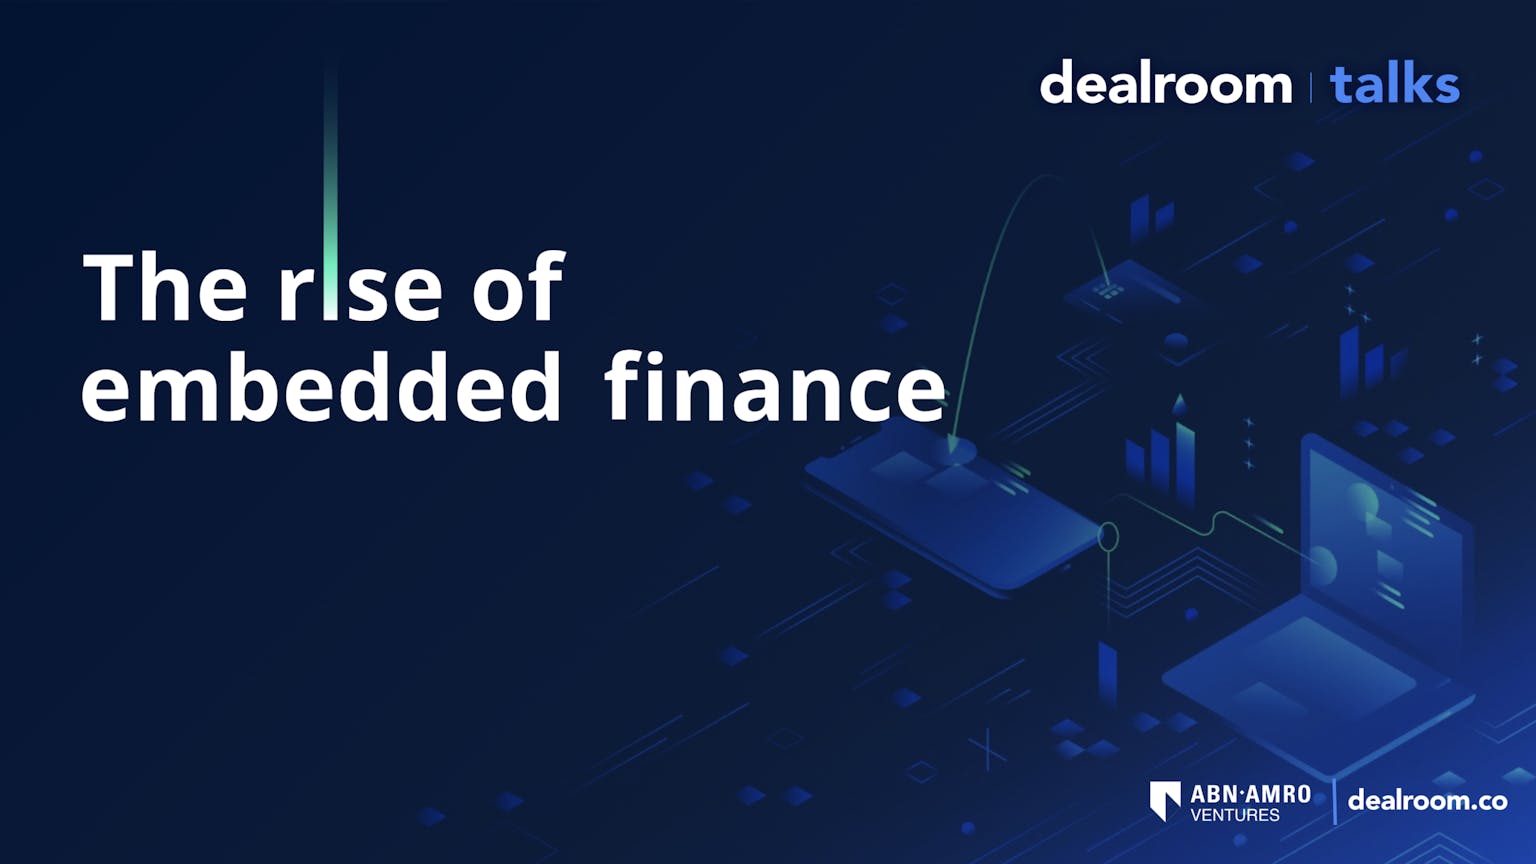 The rise of embedded finance